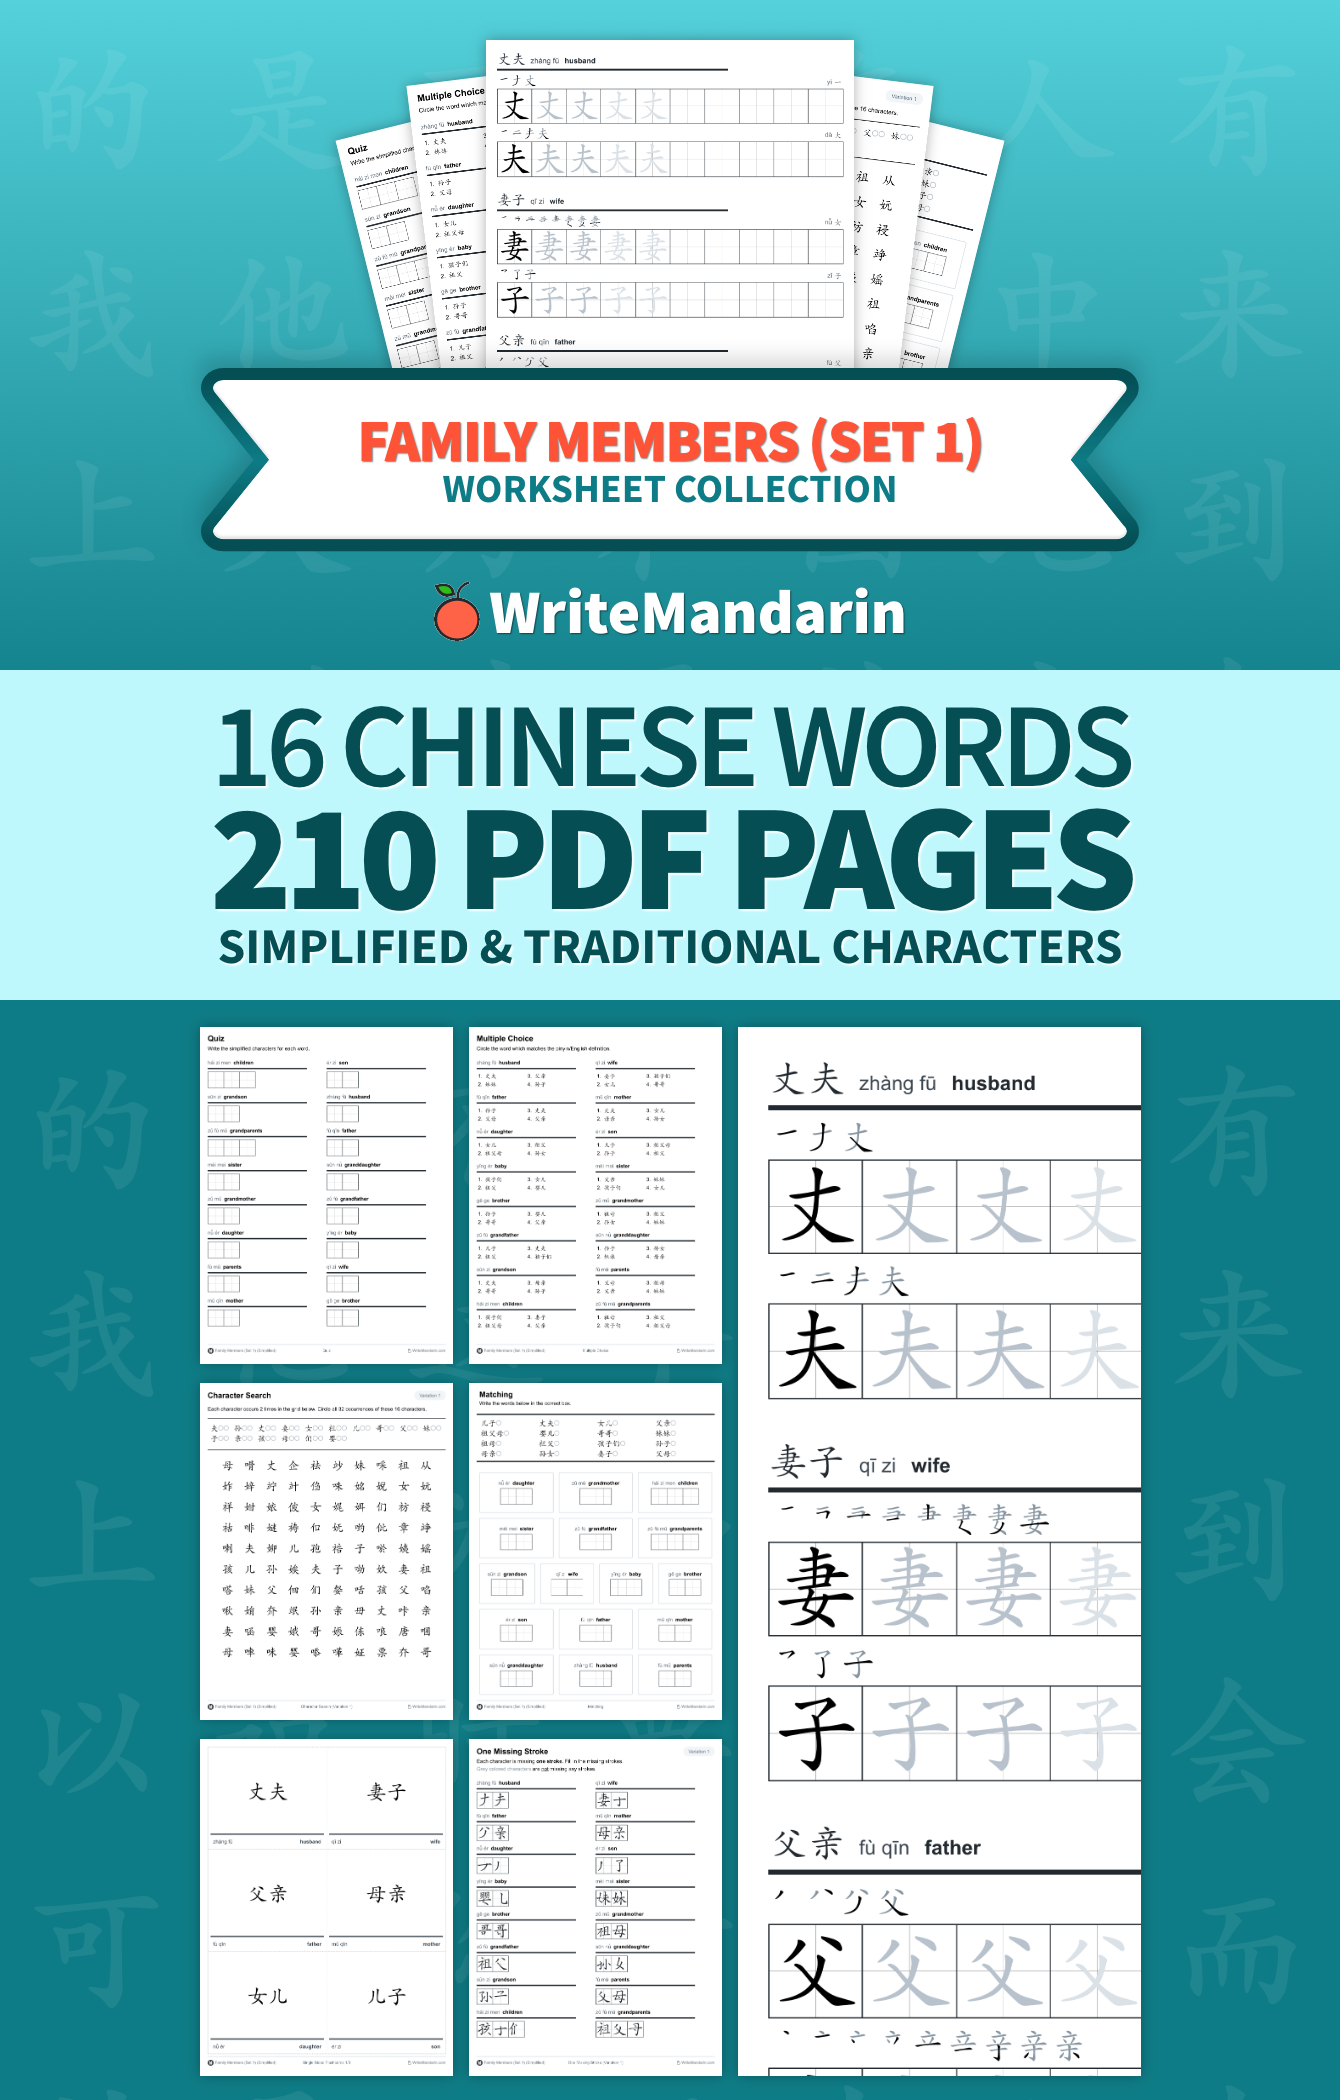 Preview image of Family Members (Set 1) worksheet collection